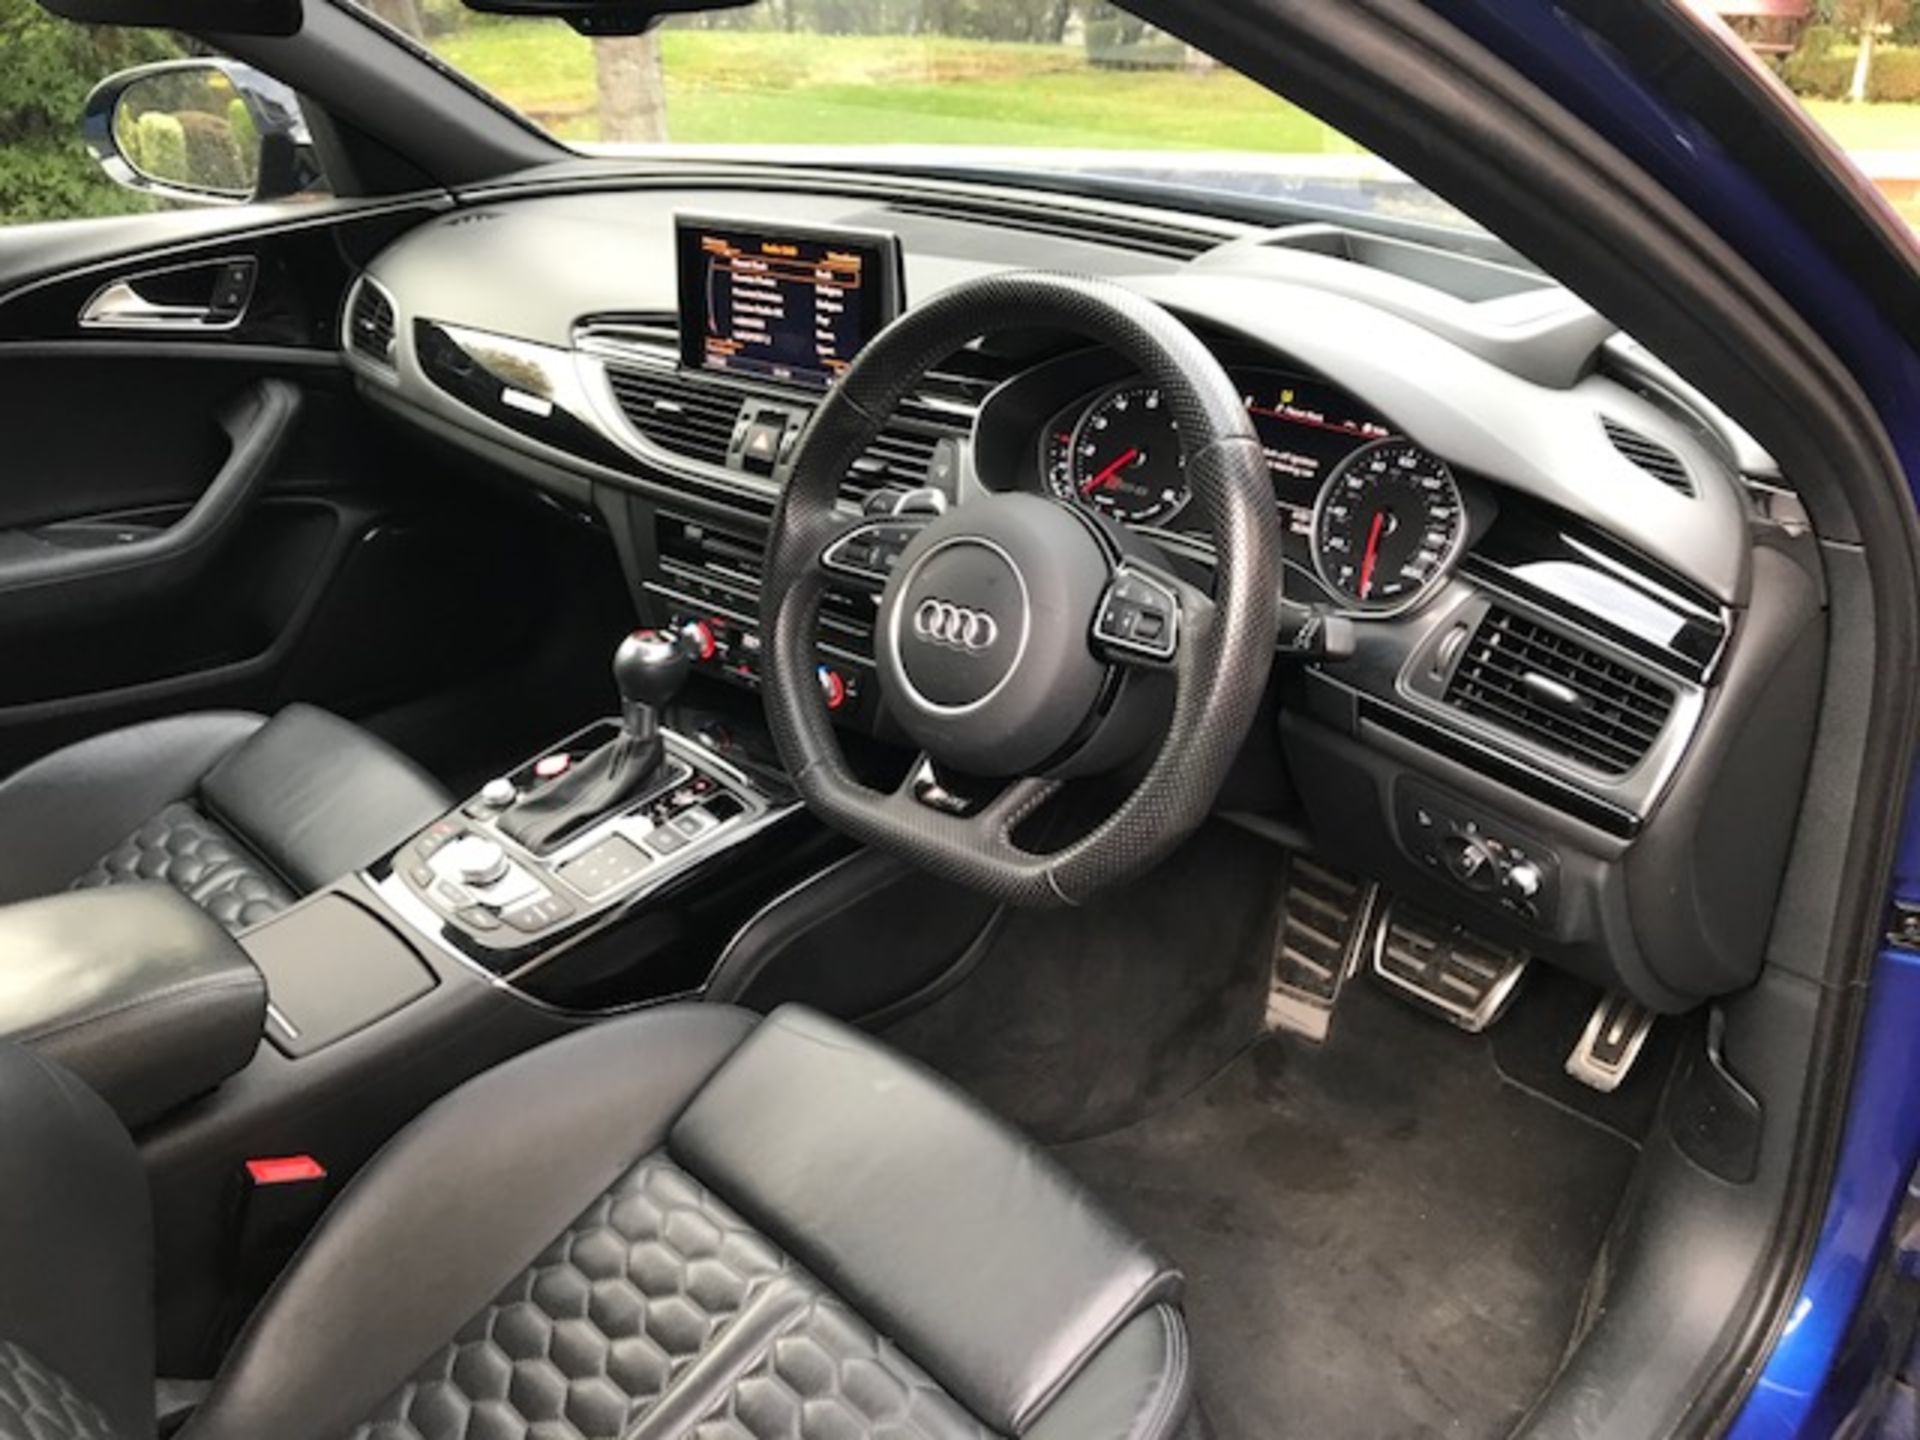 Audi C7 RS6 TFSI V8 Quattro, 2015, Audi (C7) RS6 High specification, around 35,000 miles, 5 Year - Image 12 of 19